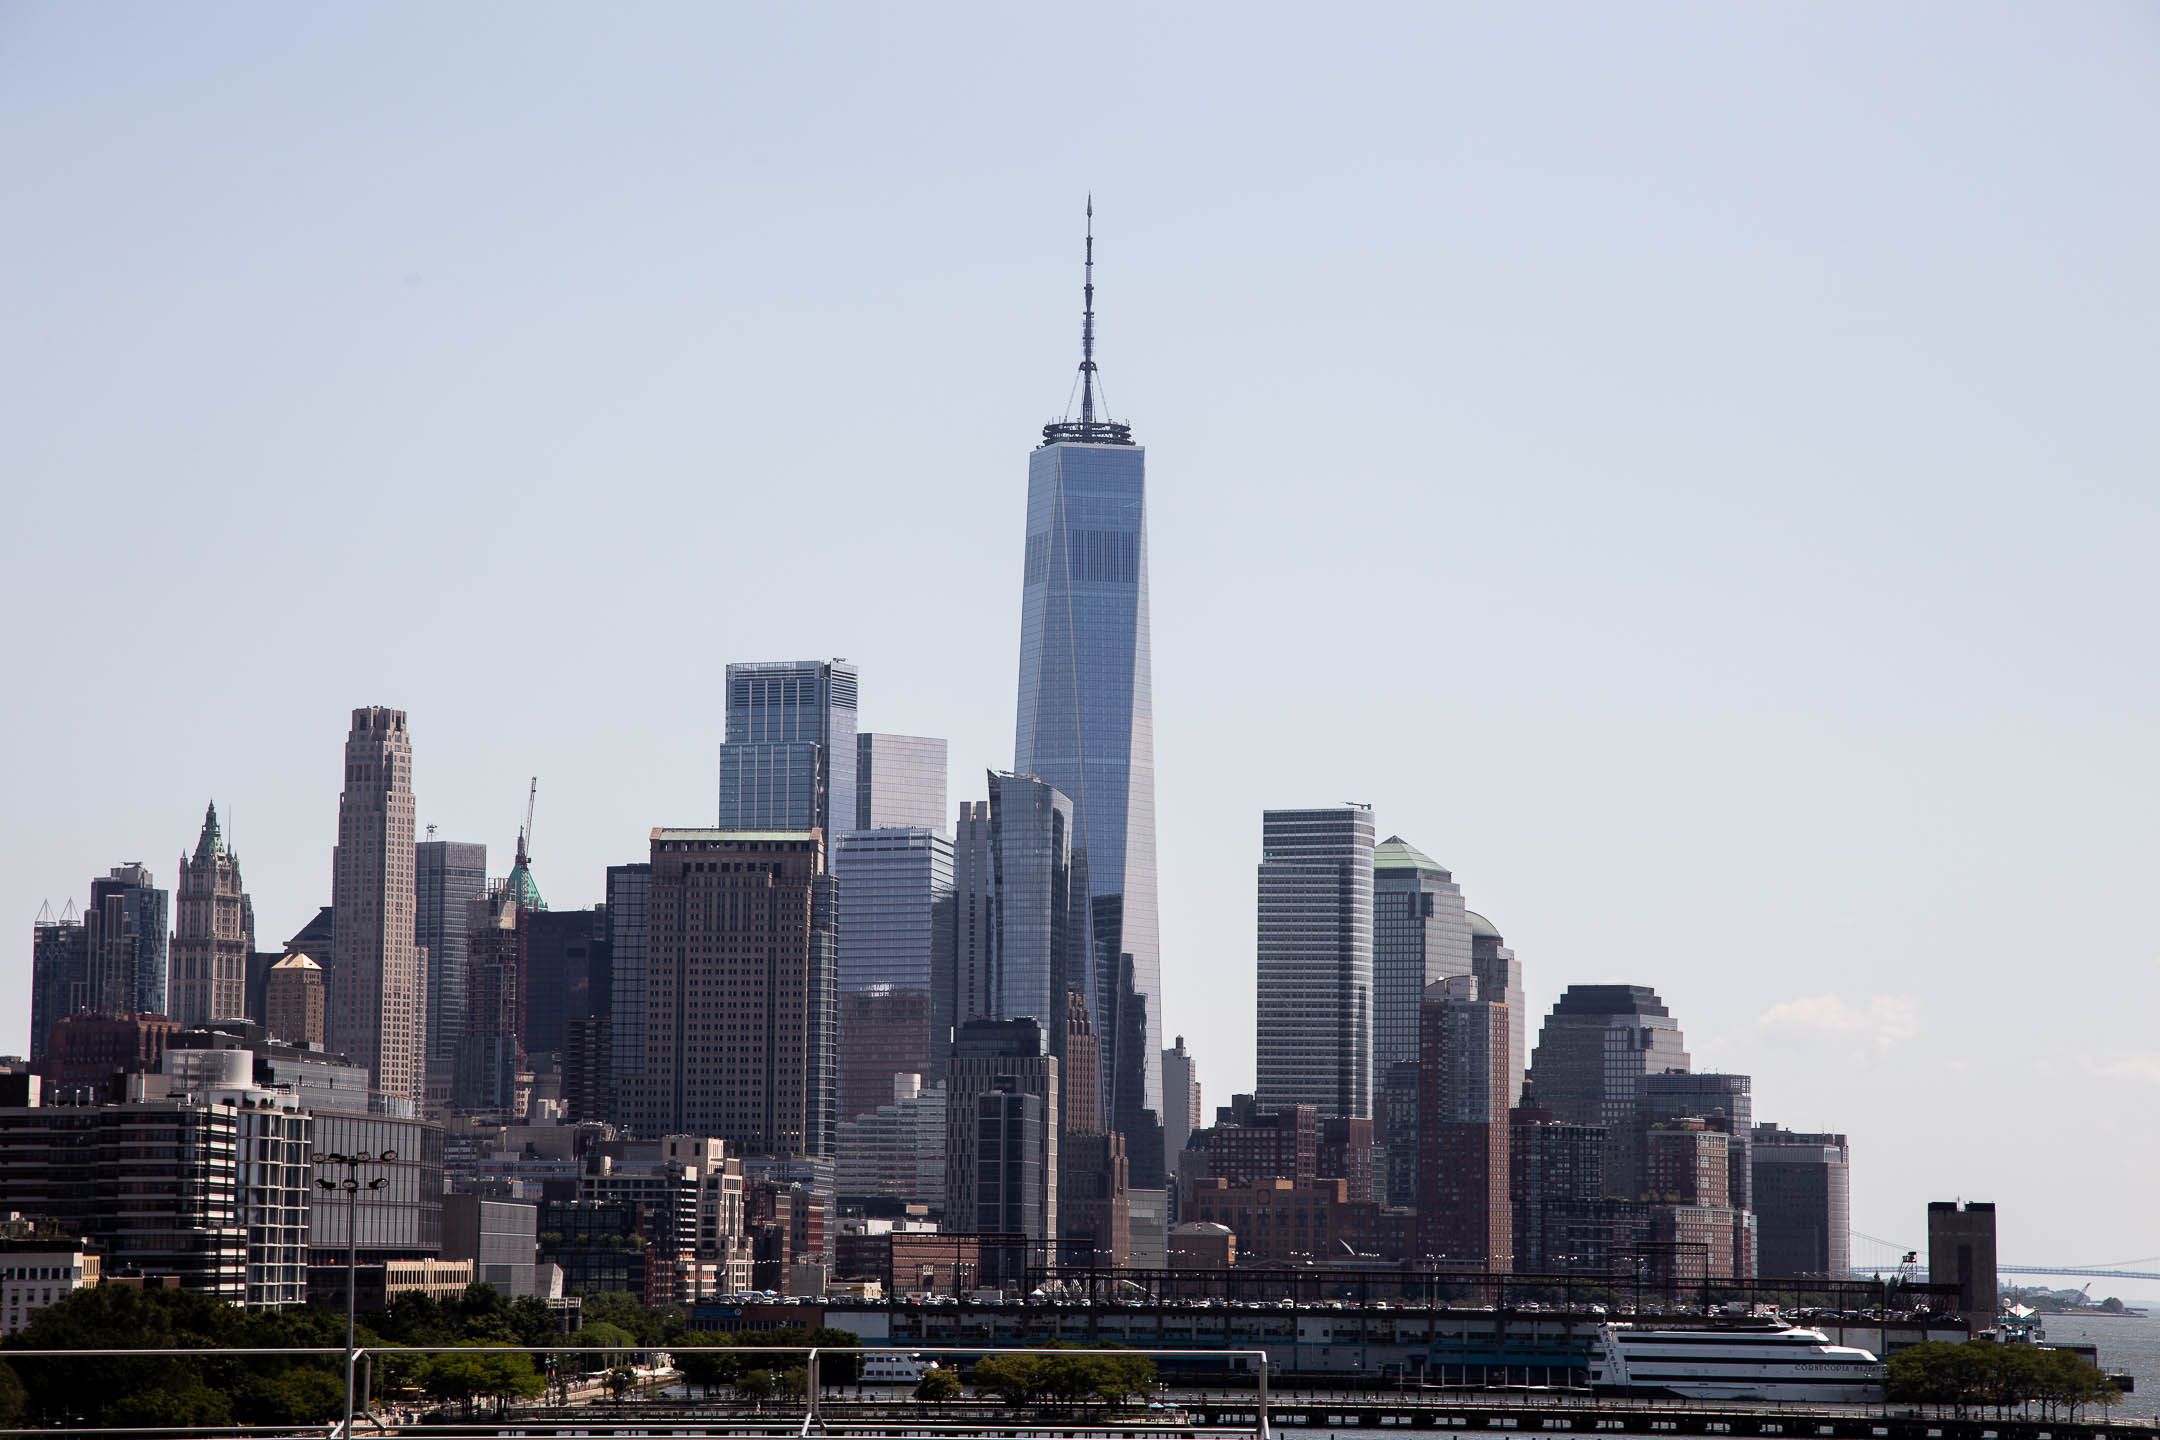 The New York City skyline, seen from a distance, with the soaring One World Trade Center building at the center. The skyscrapers reflect the soft blue sky and the evening sunlight. Down at the bottom of the photo, cars drive along a road above wharfs reaching out to the water.